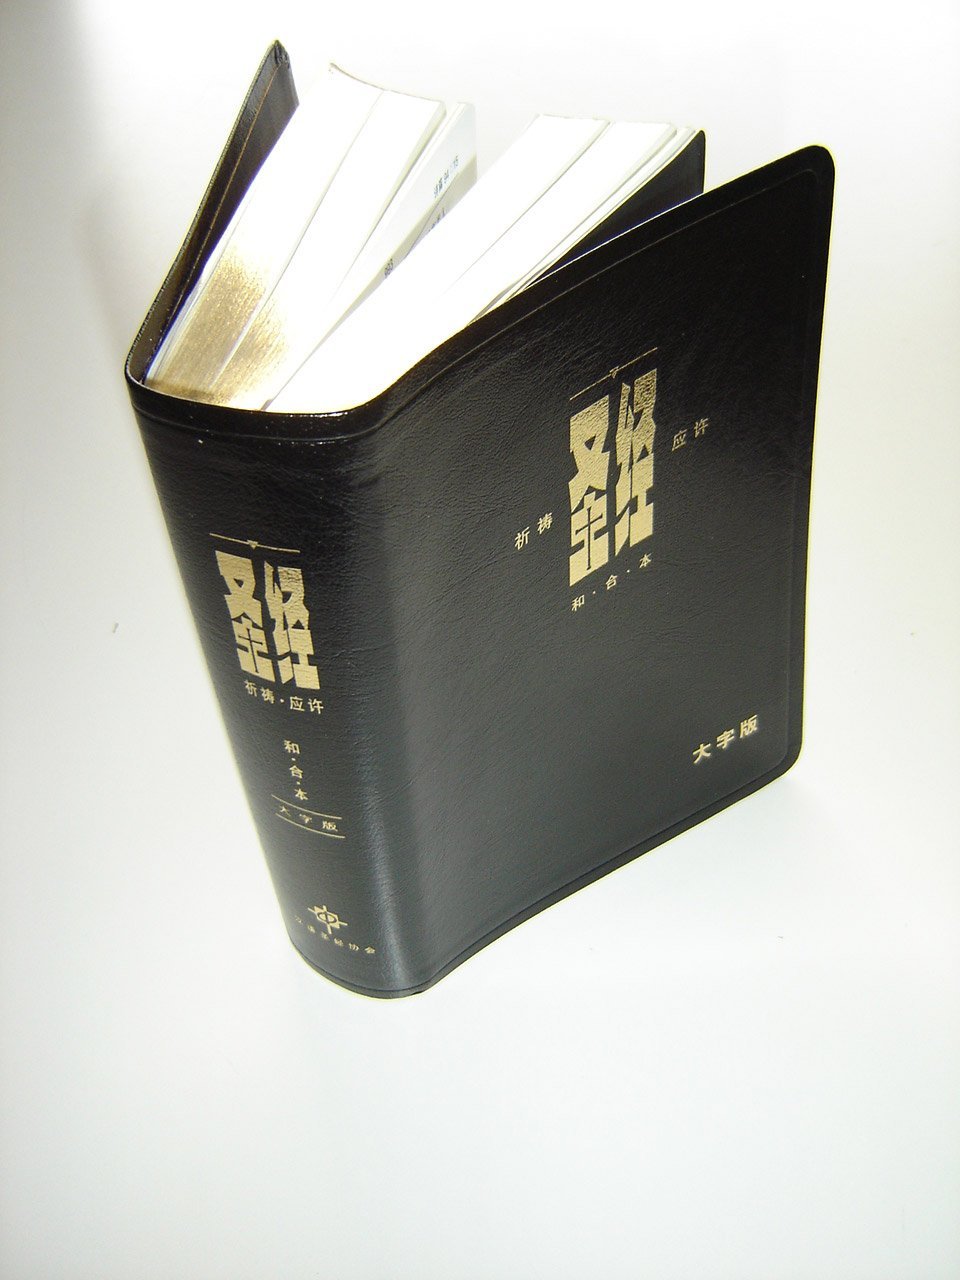 ²ëjrMX¥ Large Print Simplified Chinese Bible Leather